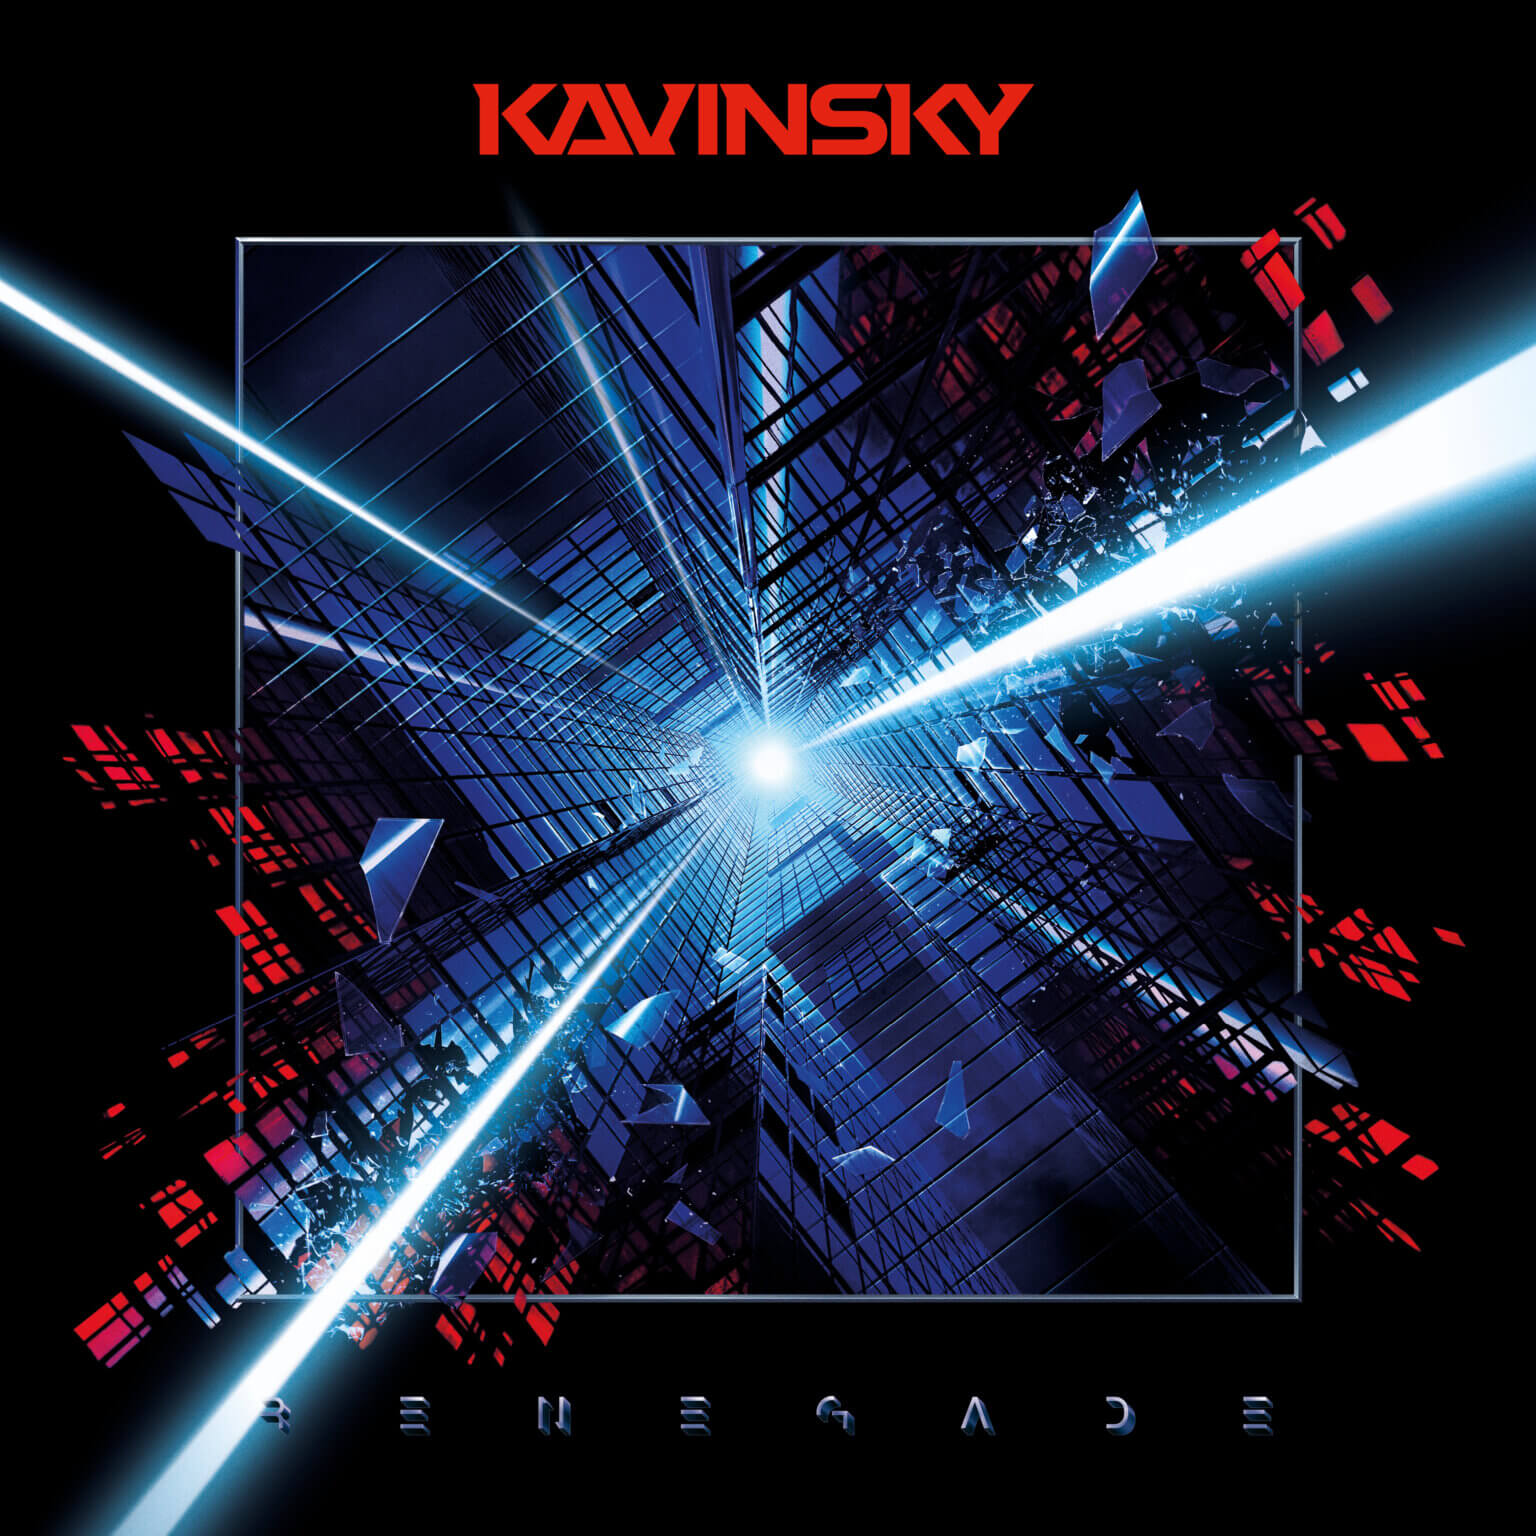 Kavinsky returns with “Renegade,” his first new music since 2013. The track, which features vocals from Cautious Clay